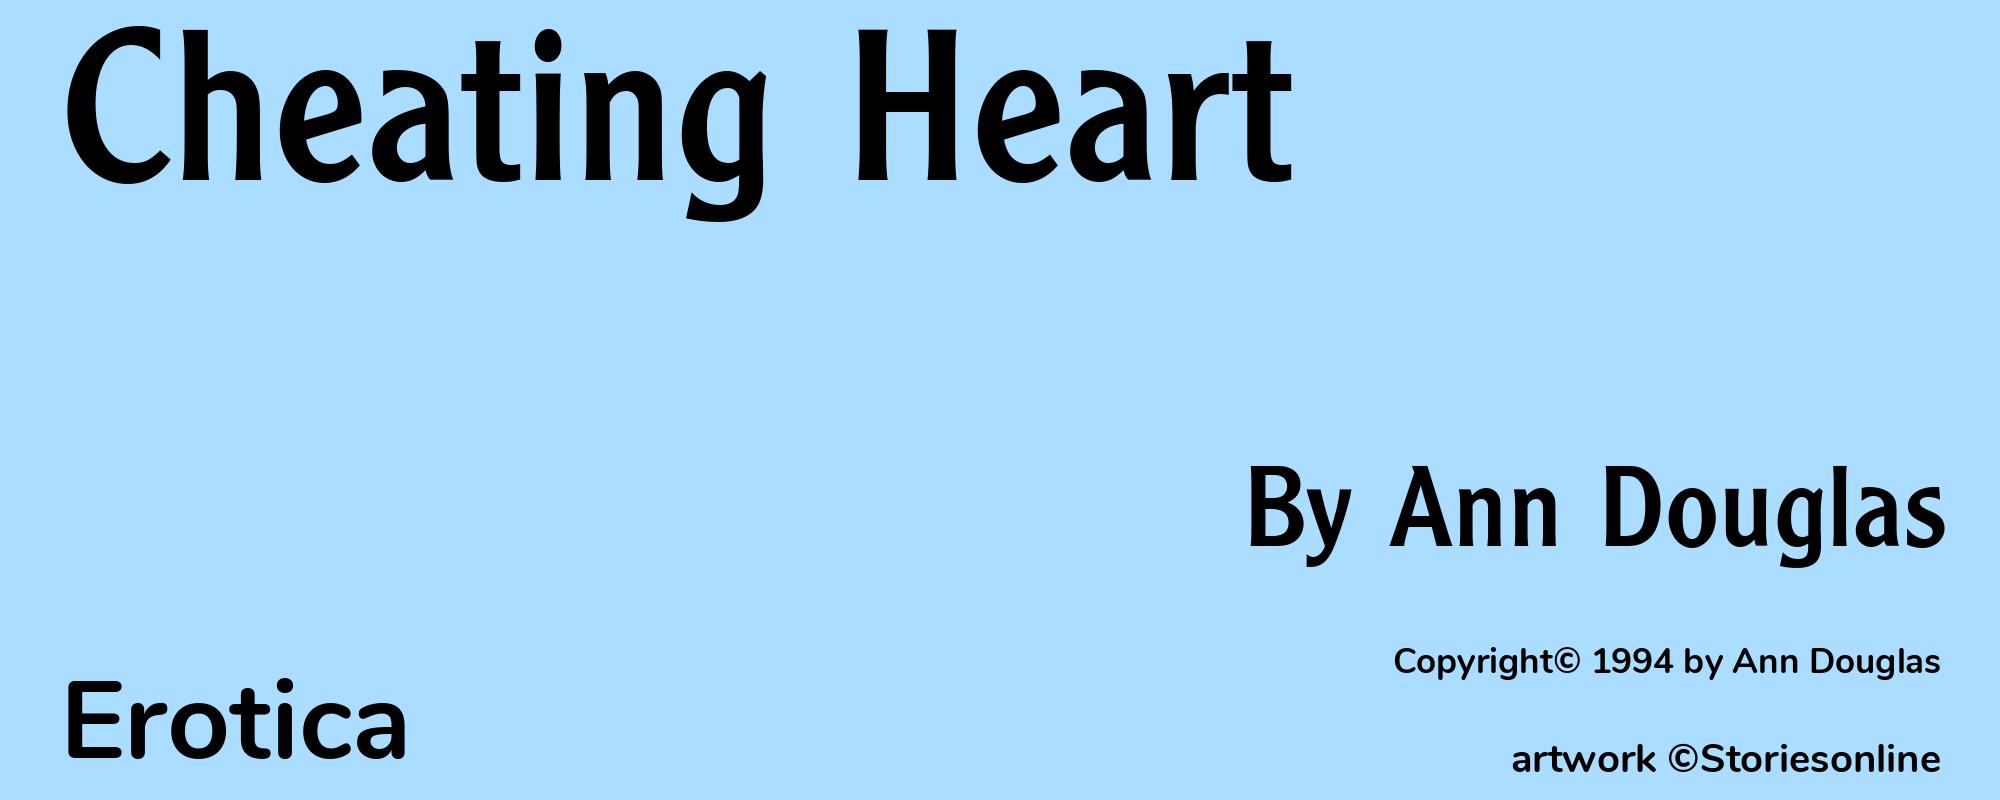 Cheating Heart - Cover